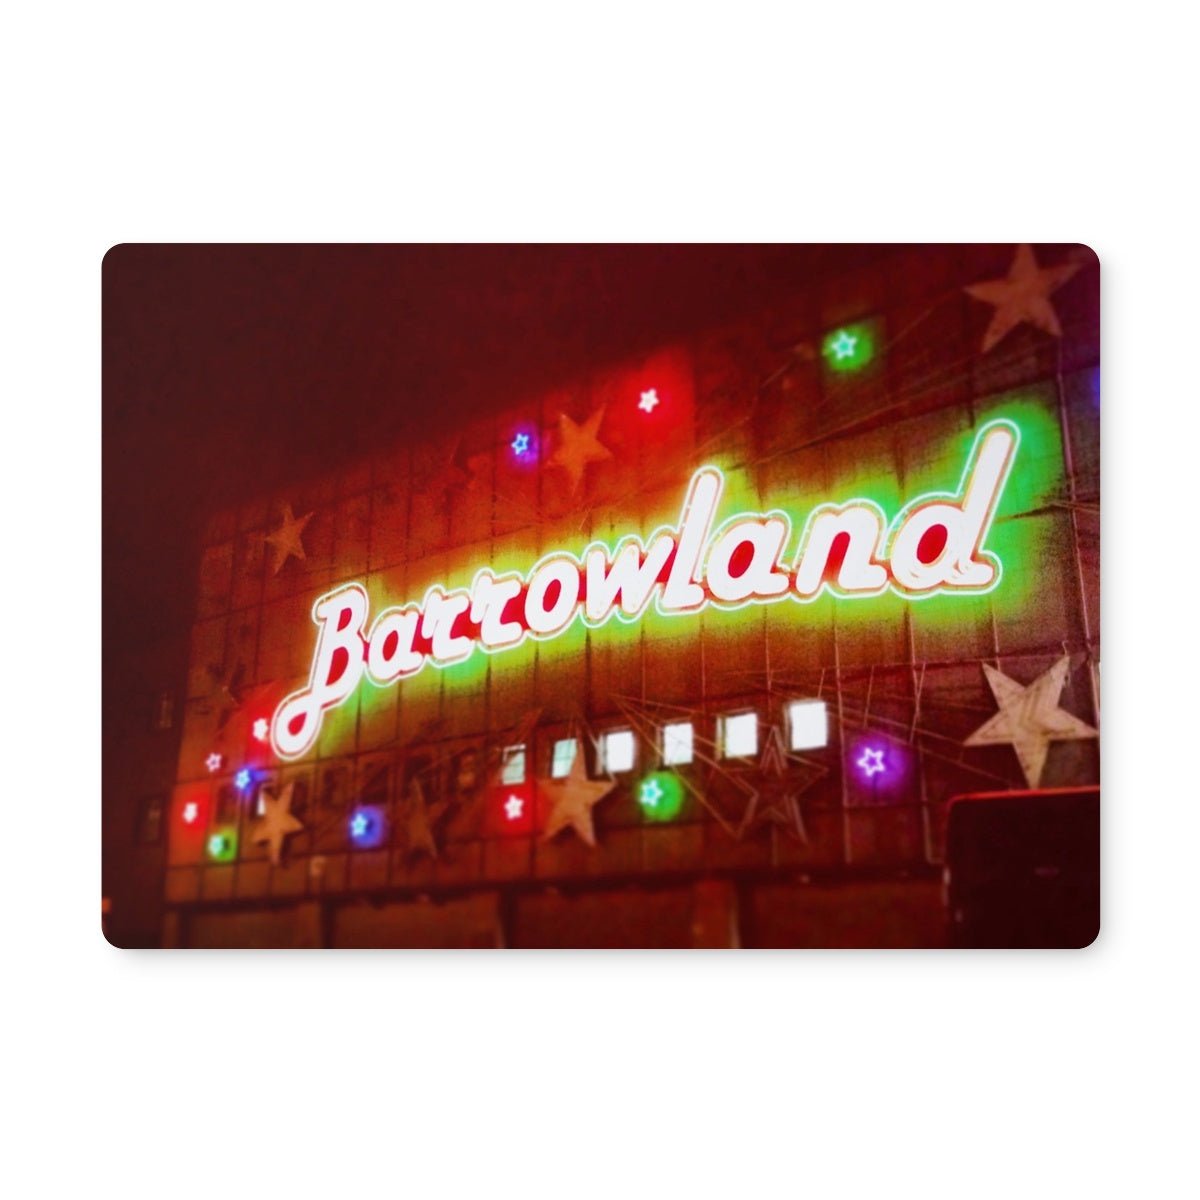 A Neon Glasgow Barrowlands Art Gifts Placemat-Placemats-Edinburgh & Glasgow Art Gallery-4 Placemats-Paintings, Prints, Homeware, Art Gifts From Scotland By Scottish Artist Kevin Hunter